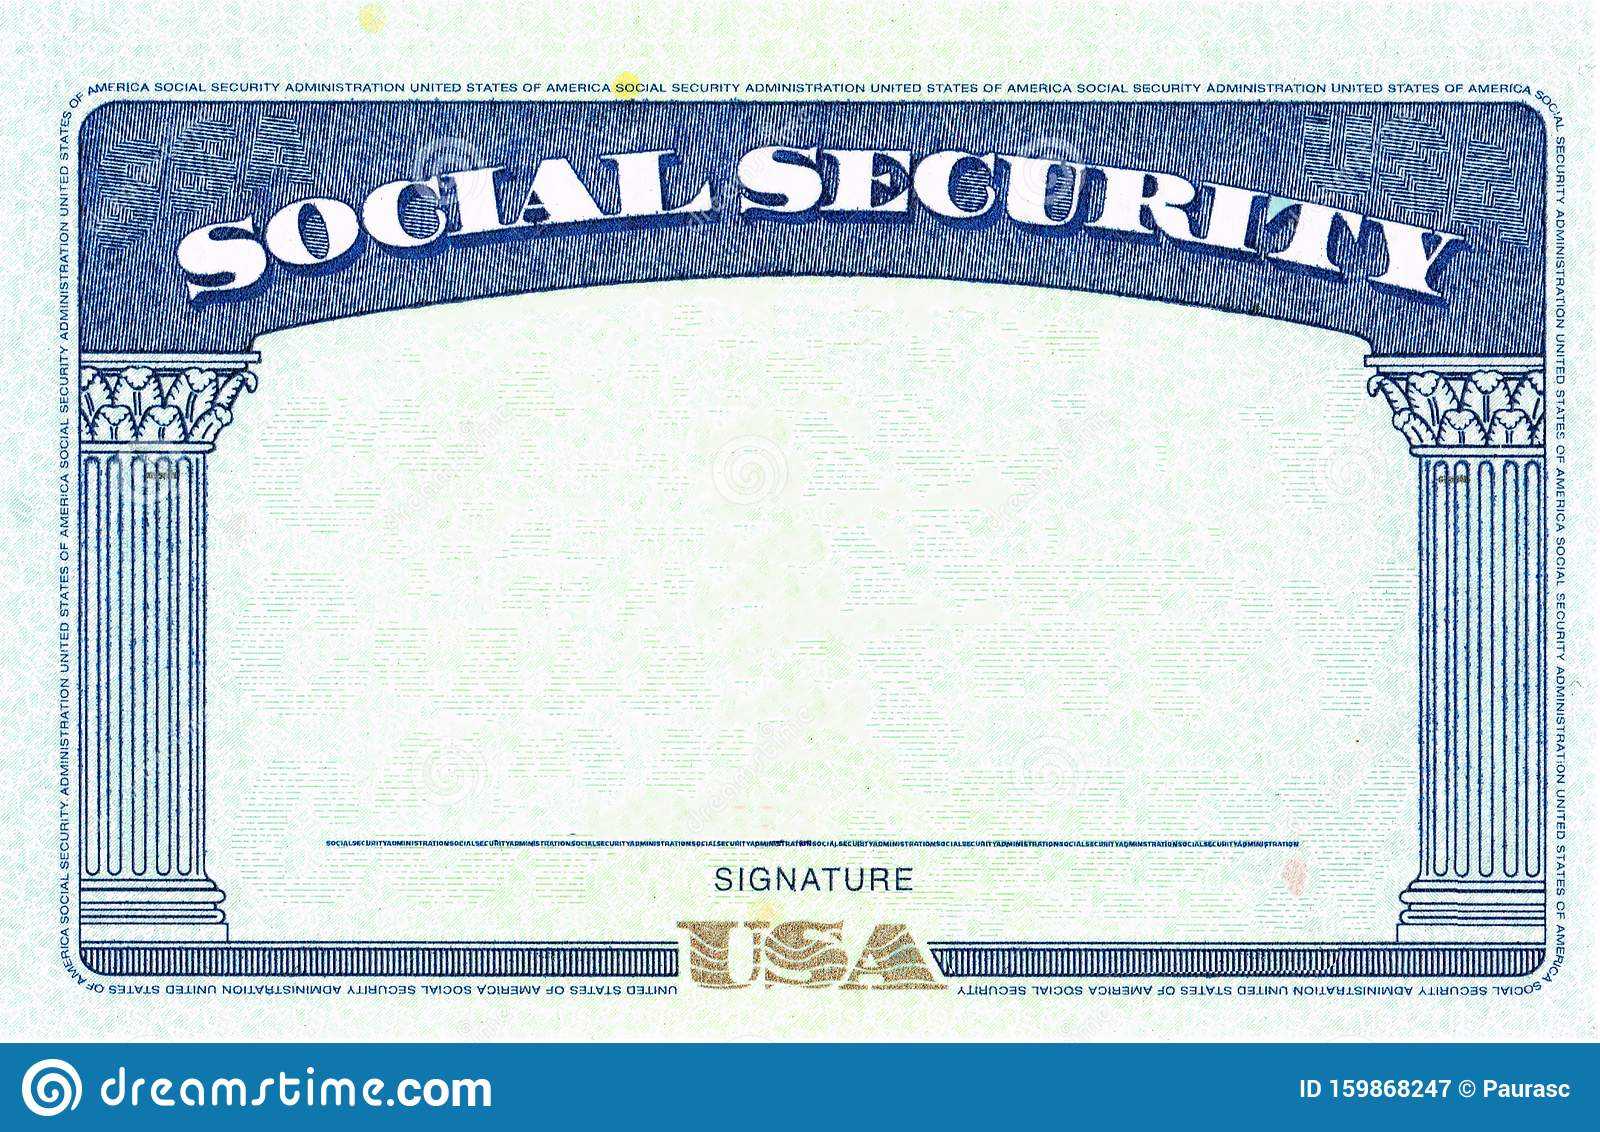 Social Security Card Blank Stock Image. Image Of Emigration Pertaining To Blank Social Security Card Template